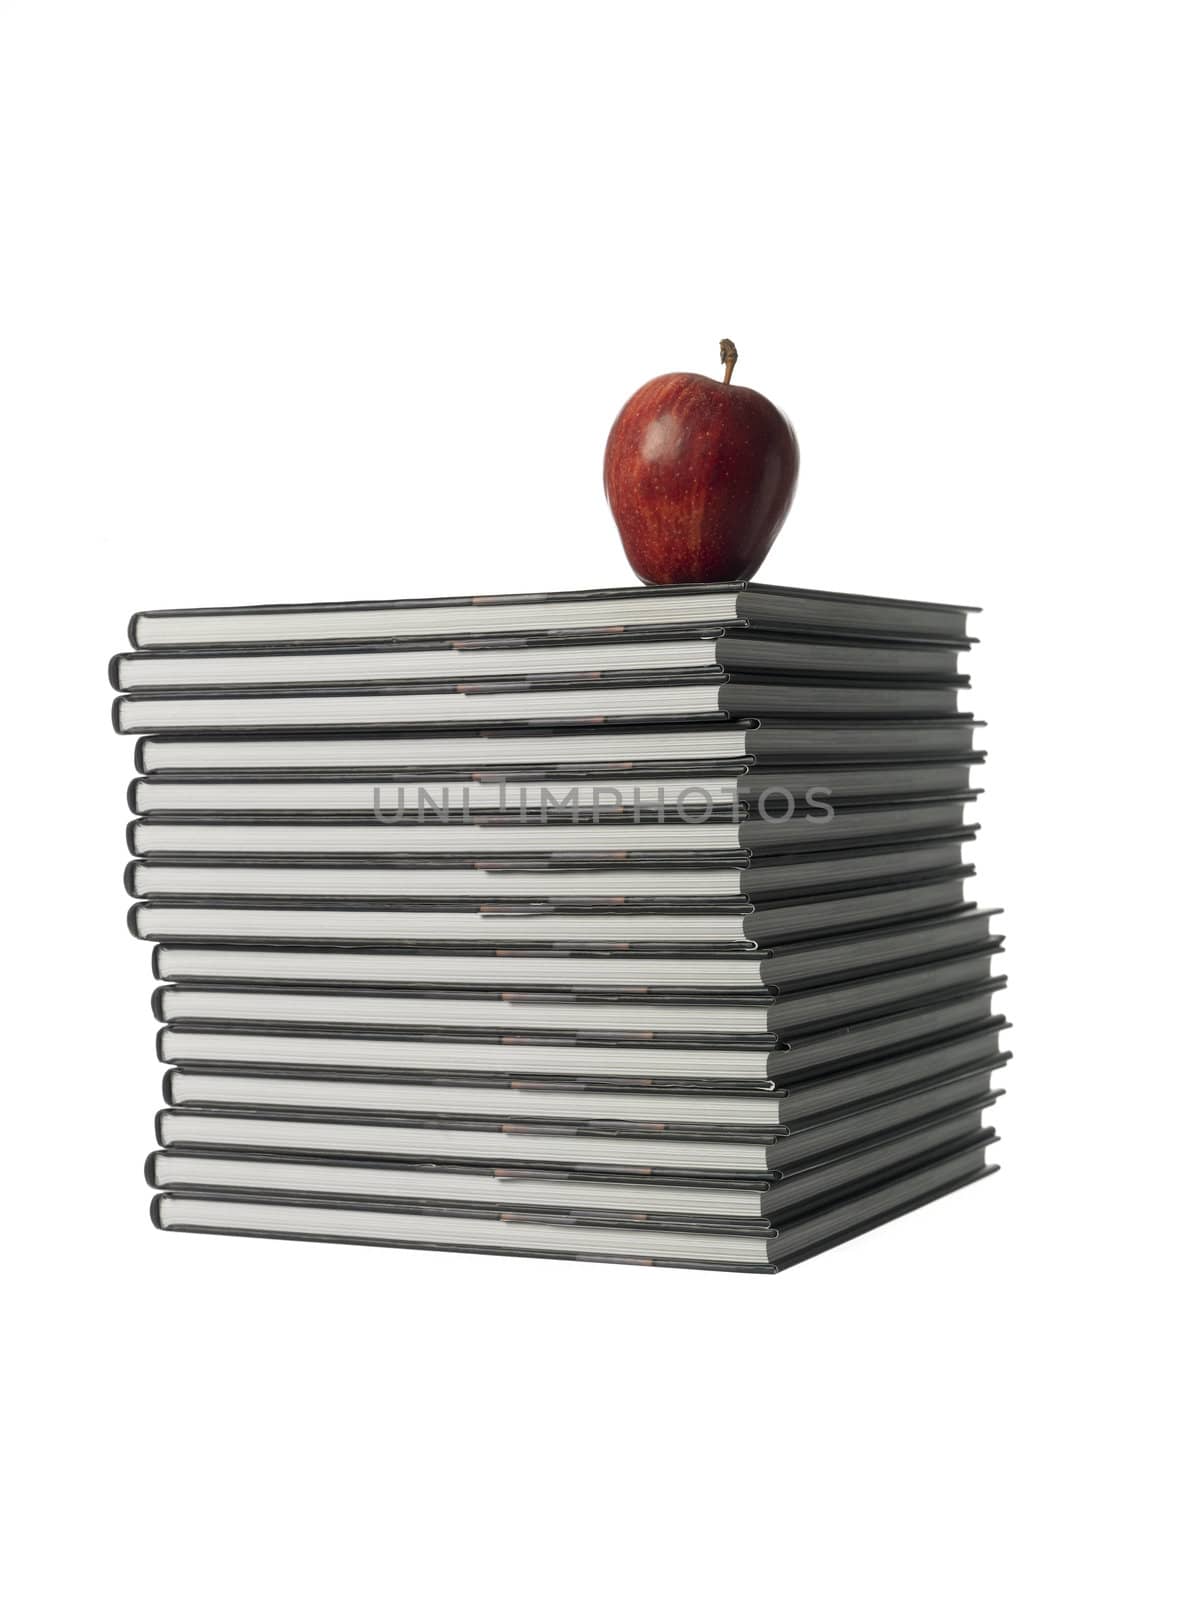 pile of books with a apple